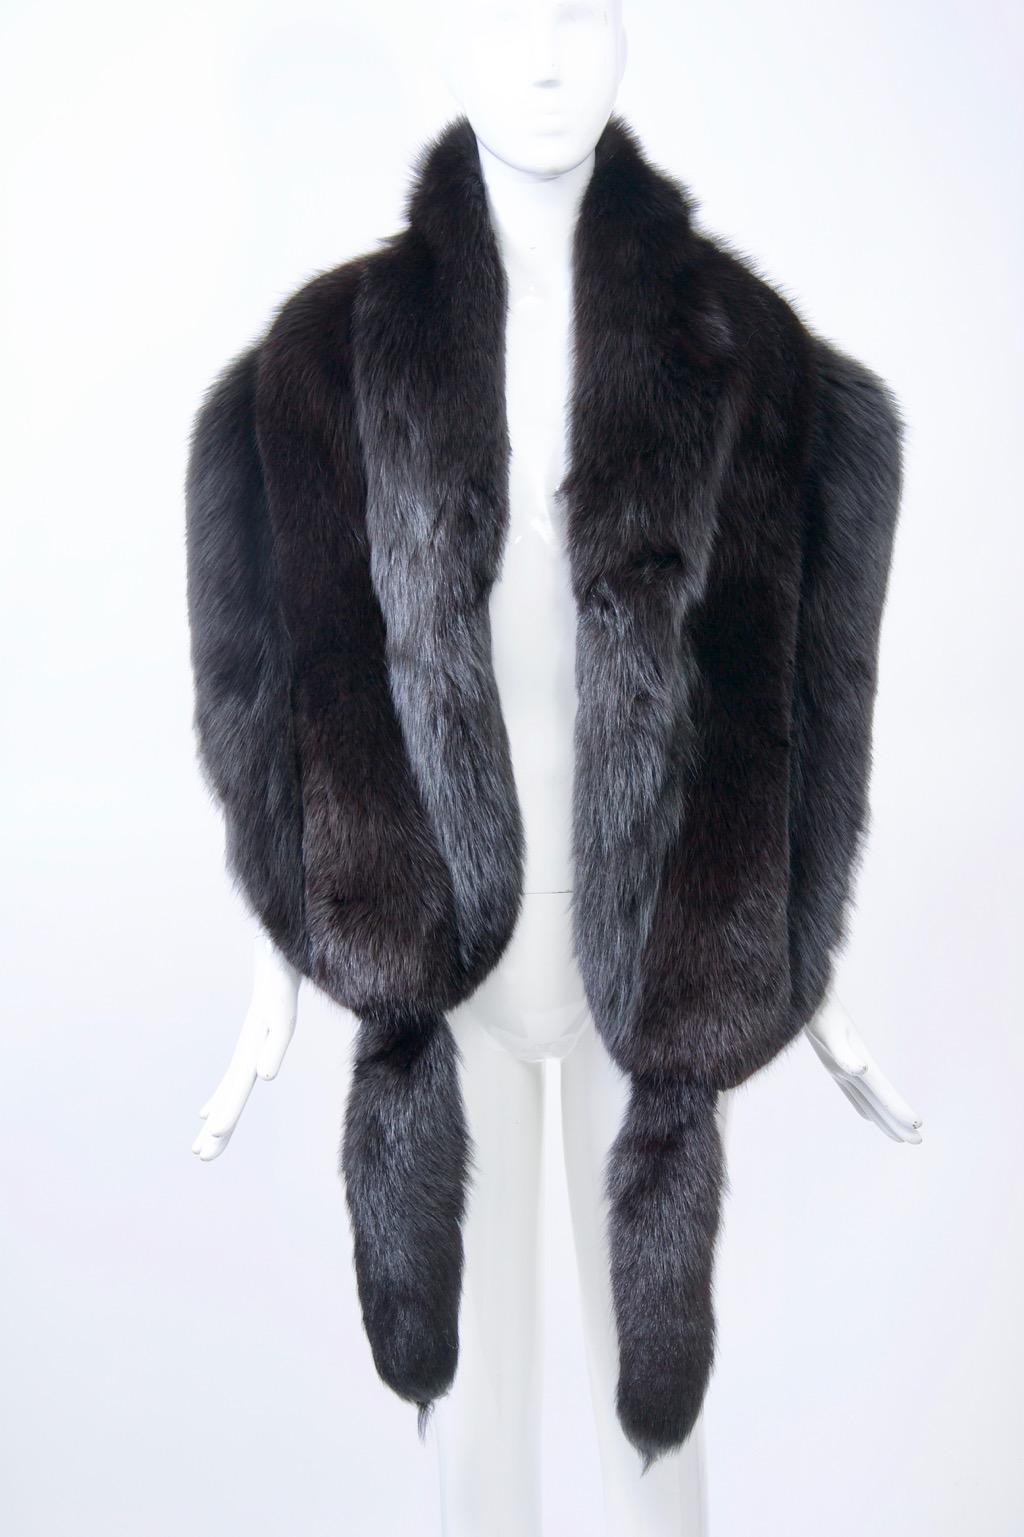 Sumptuous, full skins define this glamorous black fox shawl. Crafted of three skins that are wide and long, the shawl has rounded ends ornamented by a single tail each. Lined in black velvet with hand-hold pockets near the ends. Labelled Revillon,